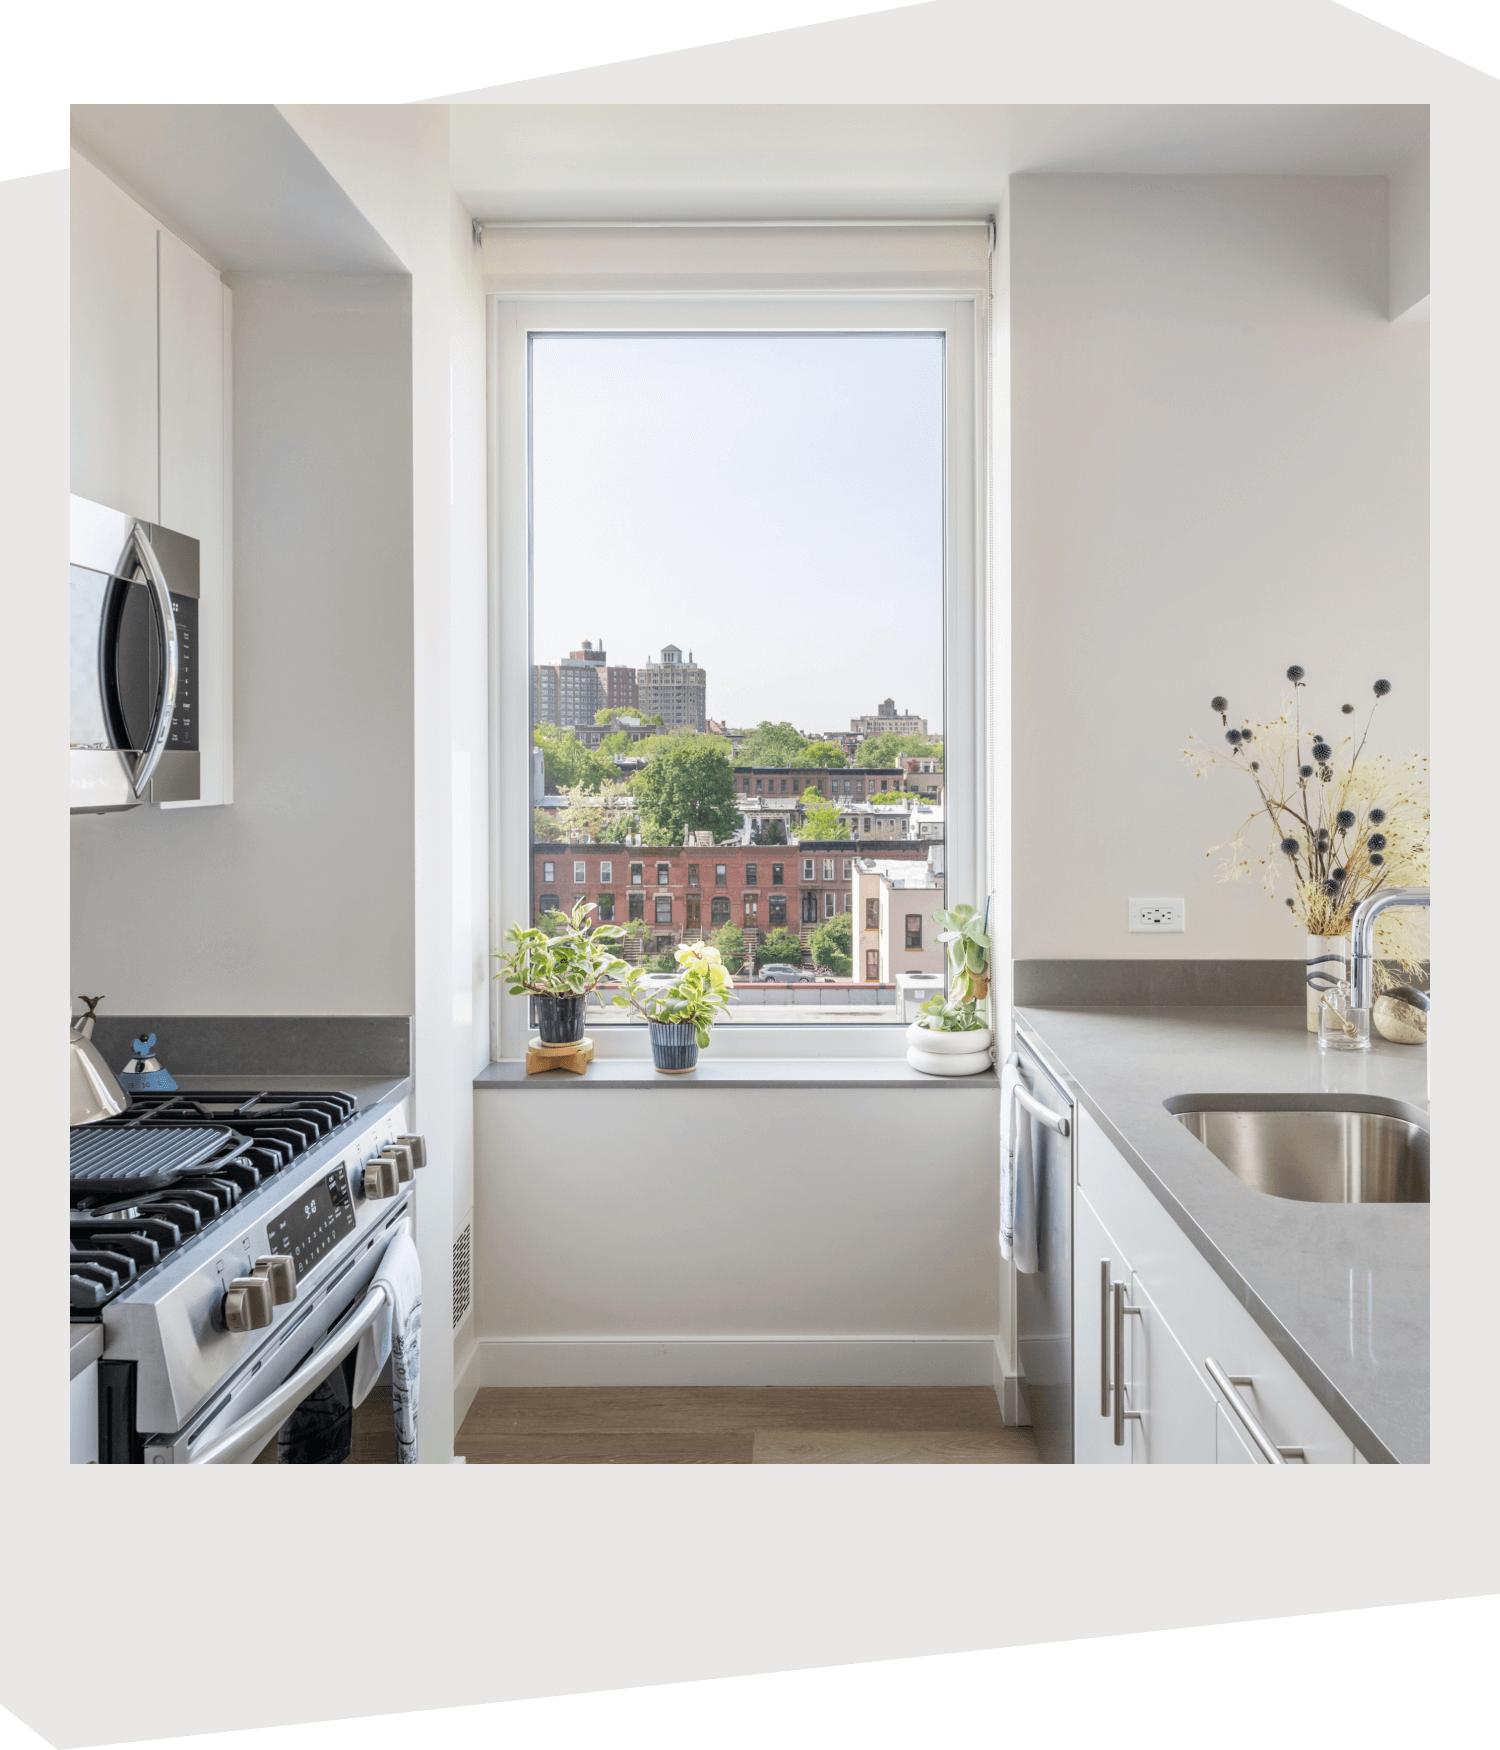 View of a windowed kitchen at 595 Dean St, showing the appliances and the Prospect Heights neighborhood outside.